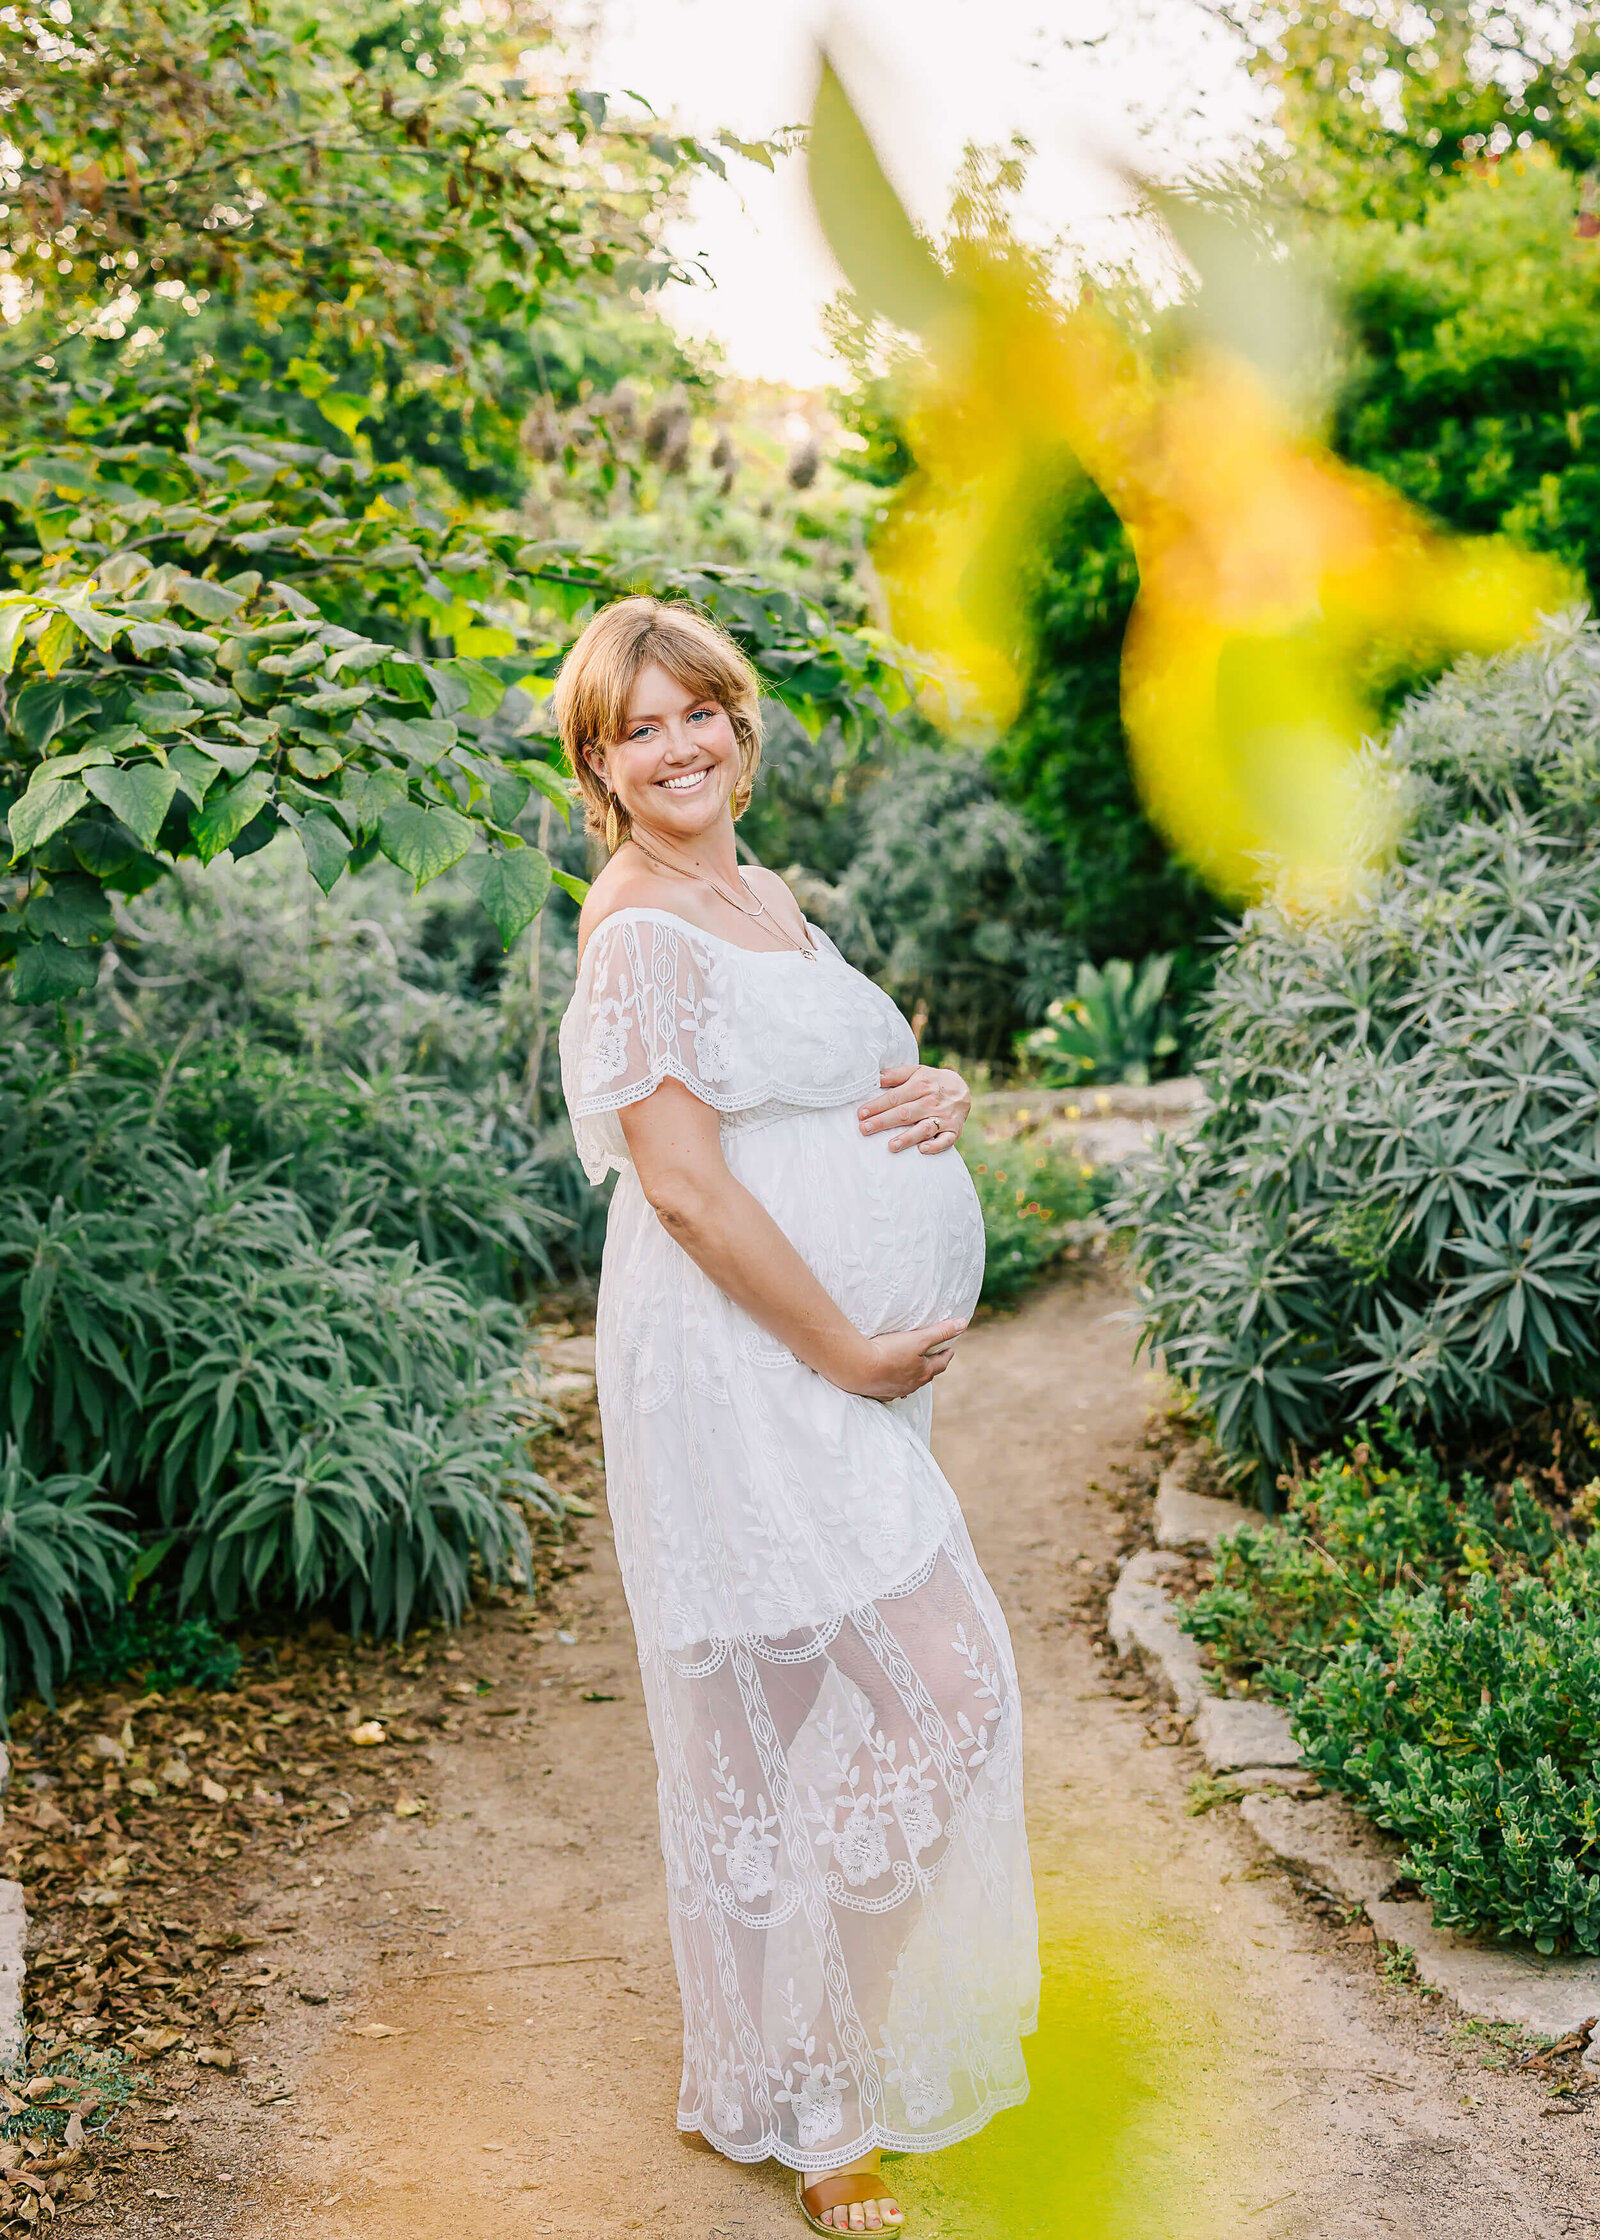 Mama standing smiling holding her baby bump wearing white dress in Huntington Beach, CA by Ashley Nicole.